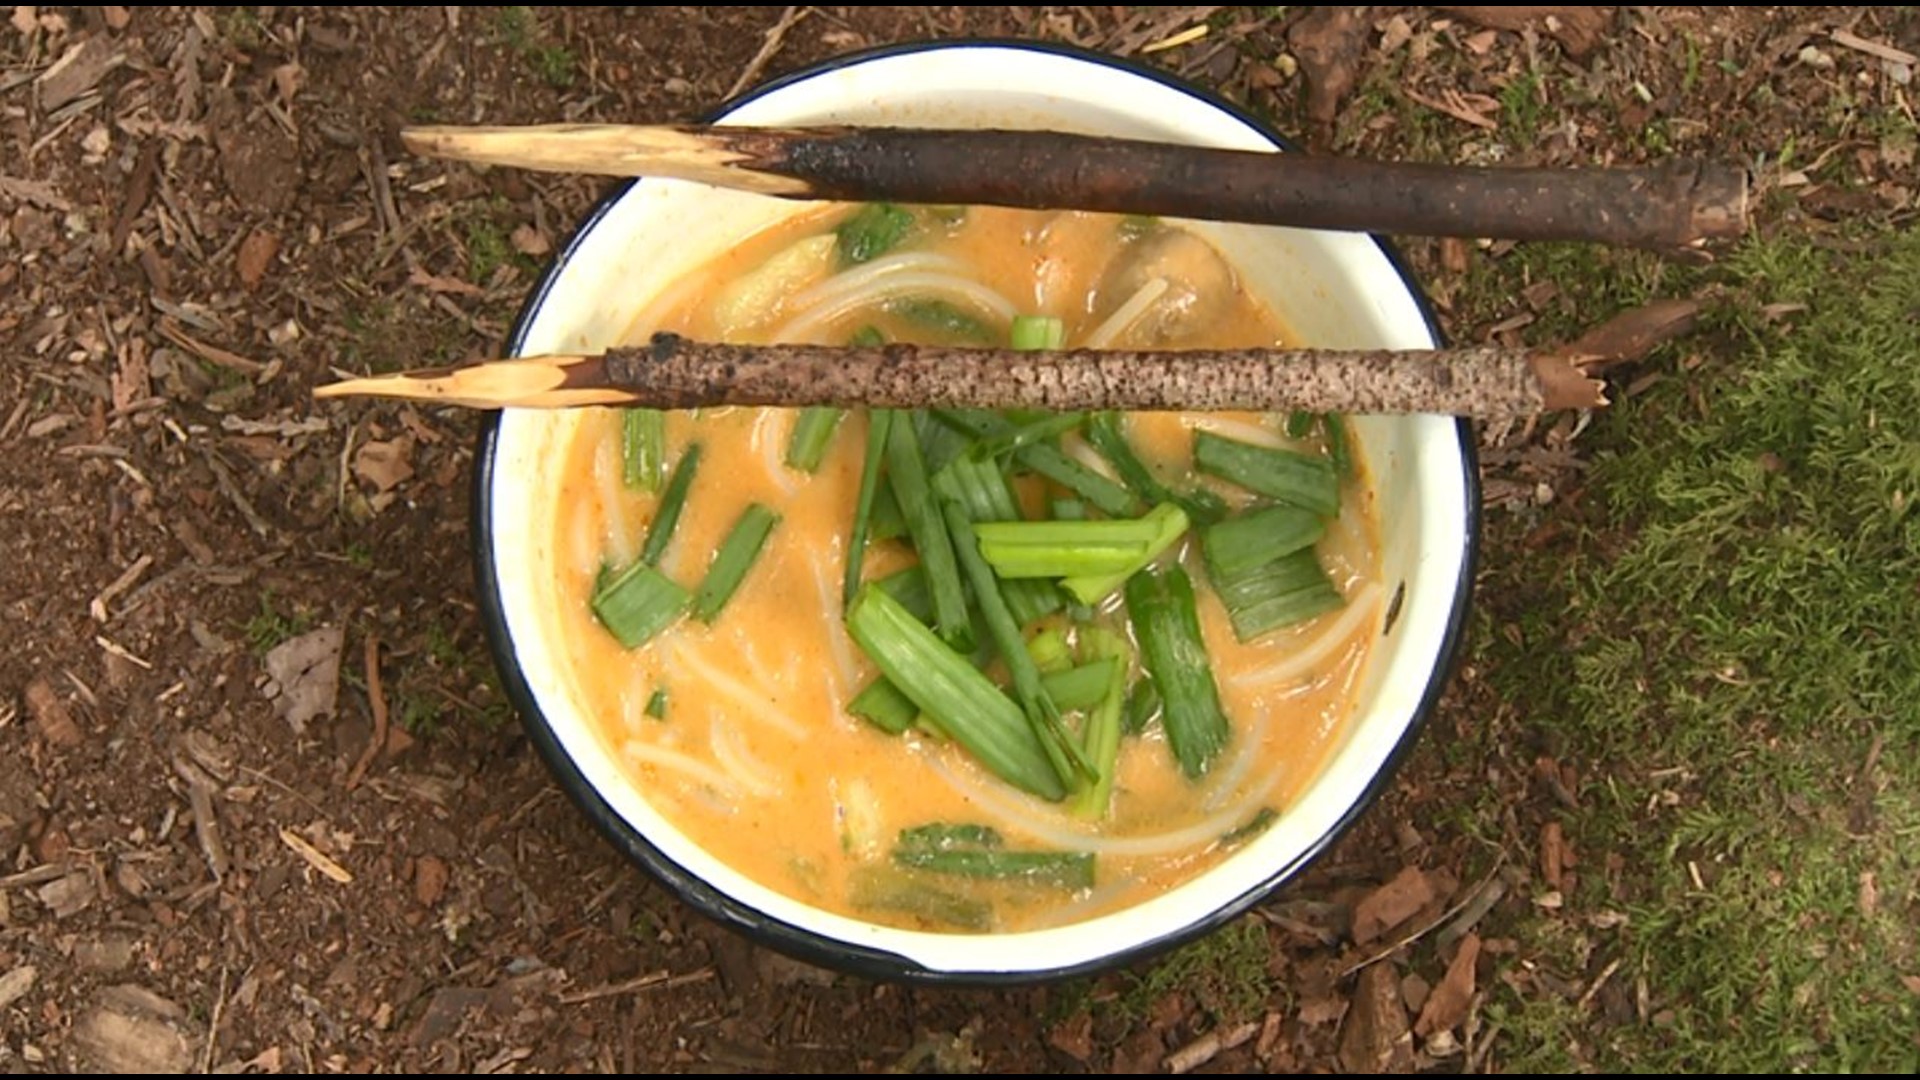 Trade beanie weenies and s'mores for Thai noodle bowls and chocolate fondue. #k5evening